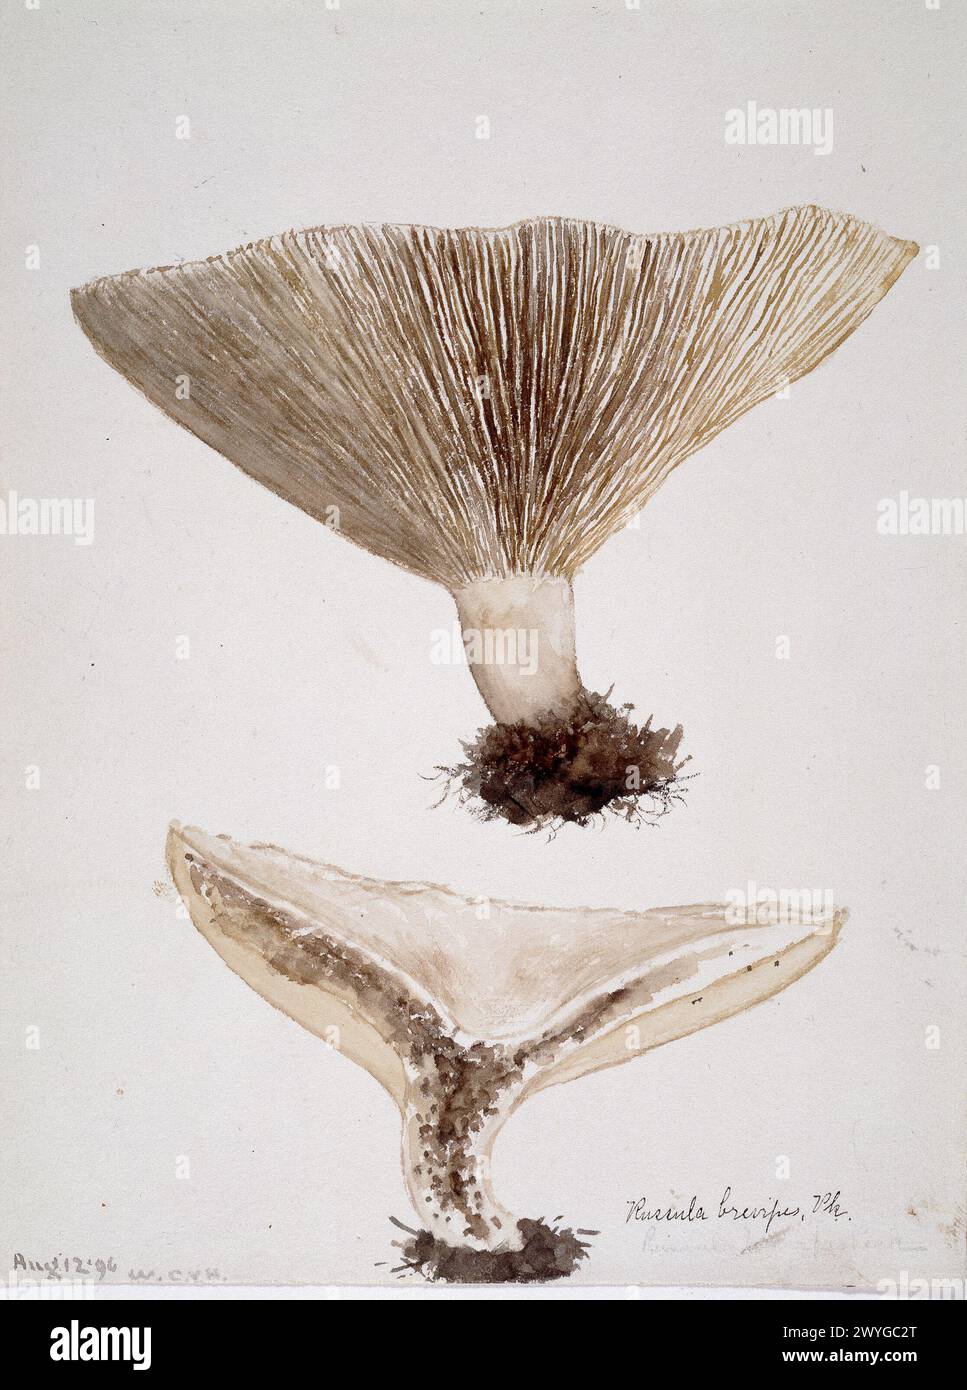 Russula brevipes, commonly known as the short-stemmed russula or the stubby brittlegill.  Mushroom.  Vintage watercolour art circa 1900 by William Cornelius Van Horne Stock Photo